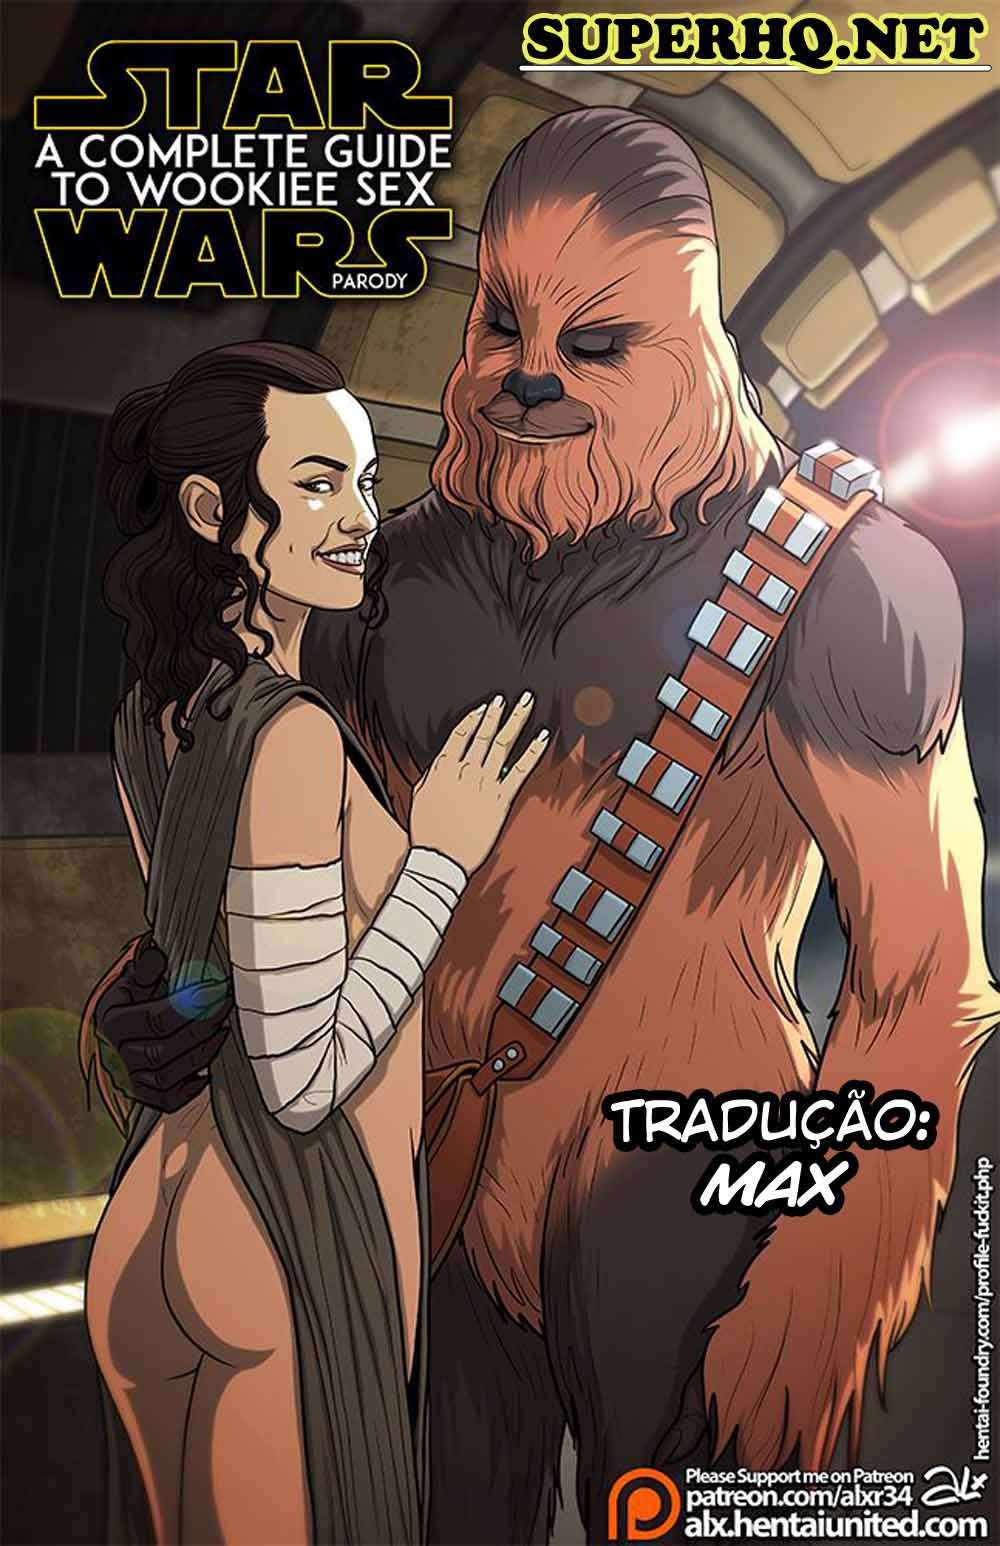 A Complete Guide to Wookie Sex - 2